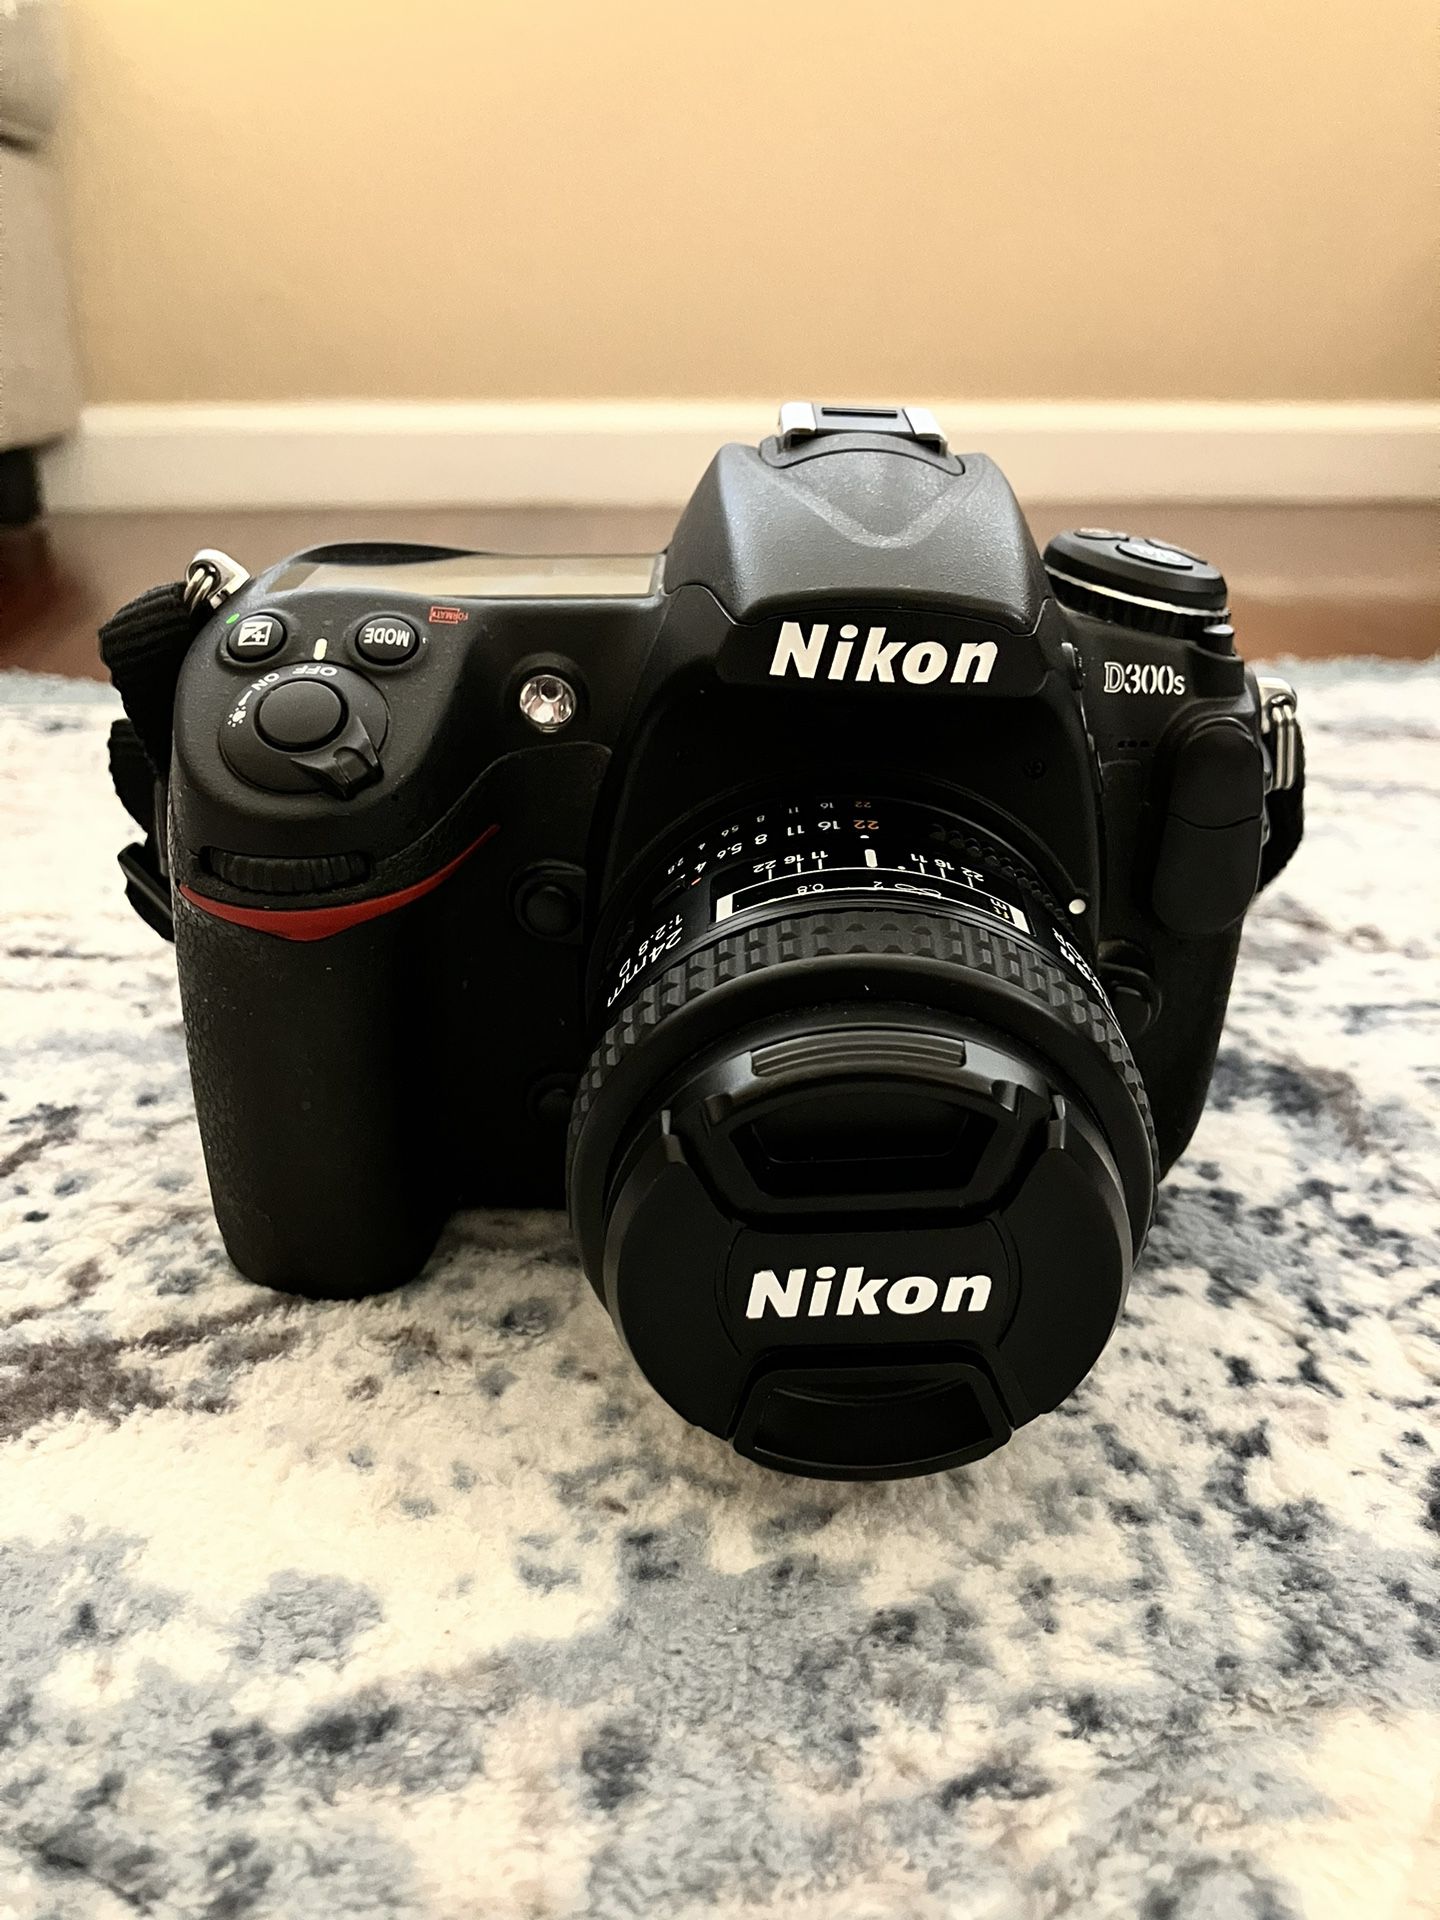 Nikon D300s Camera With 24 mm Lens AND 50mm Lens With Extra Battery And CF Card 